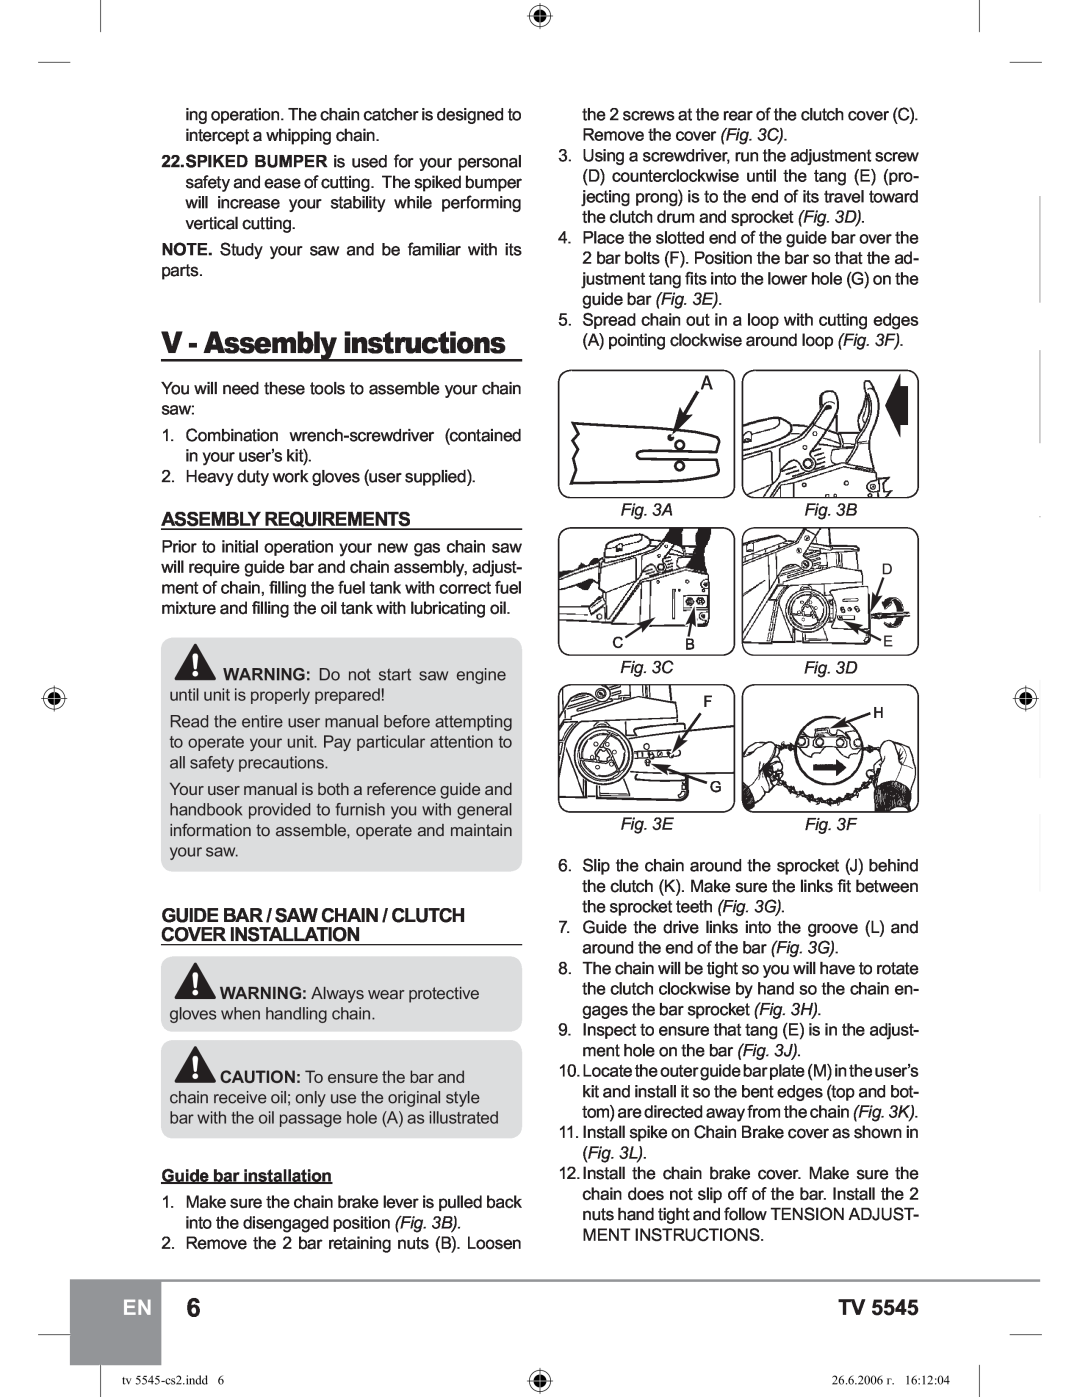 Sparky Group TV 5545 V - Assembly instructions, Assembly Requirements, Guide Bar / Saw Chain / Clutch Cover Installation 